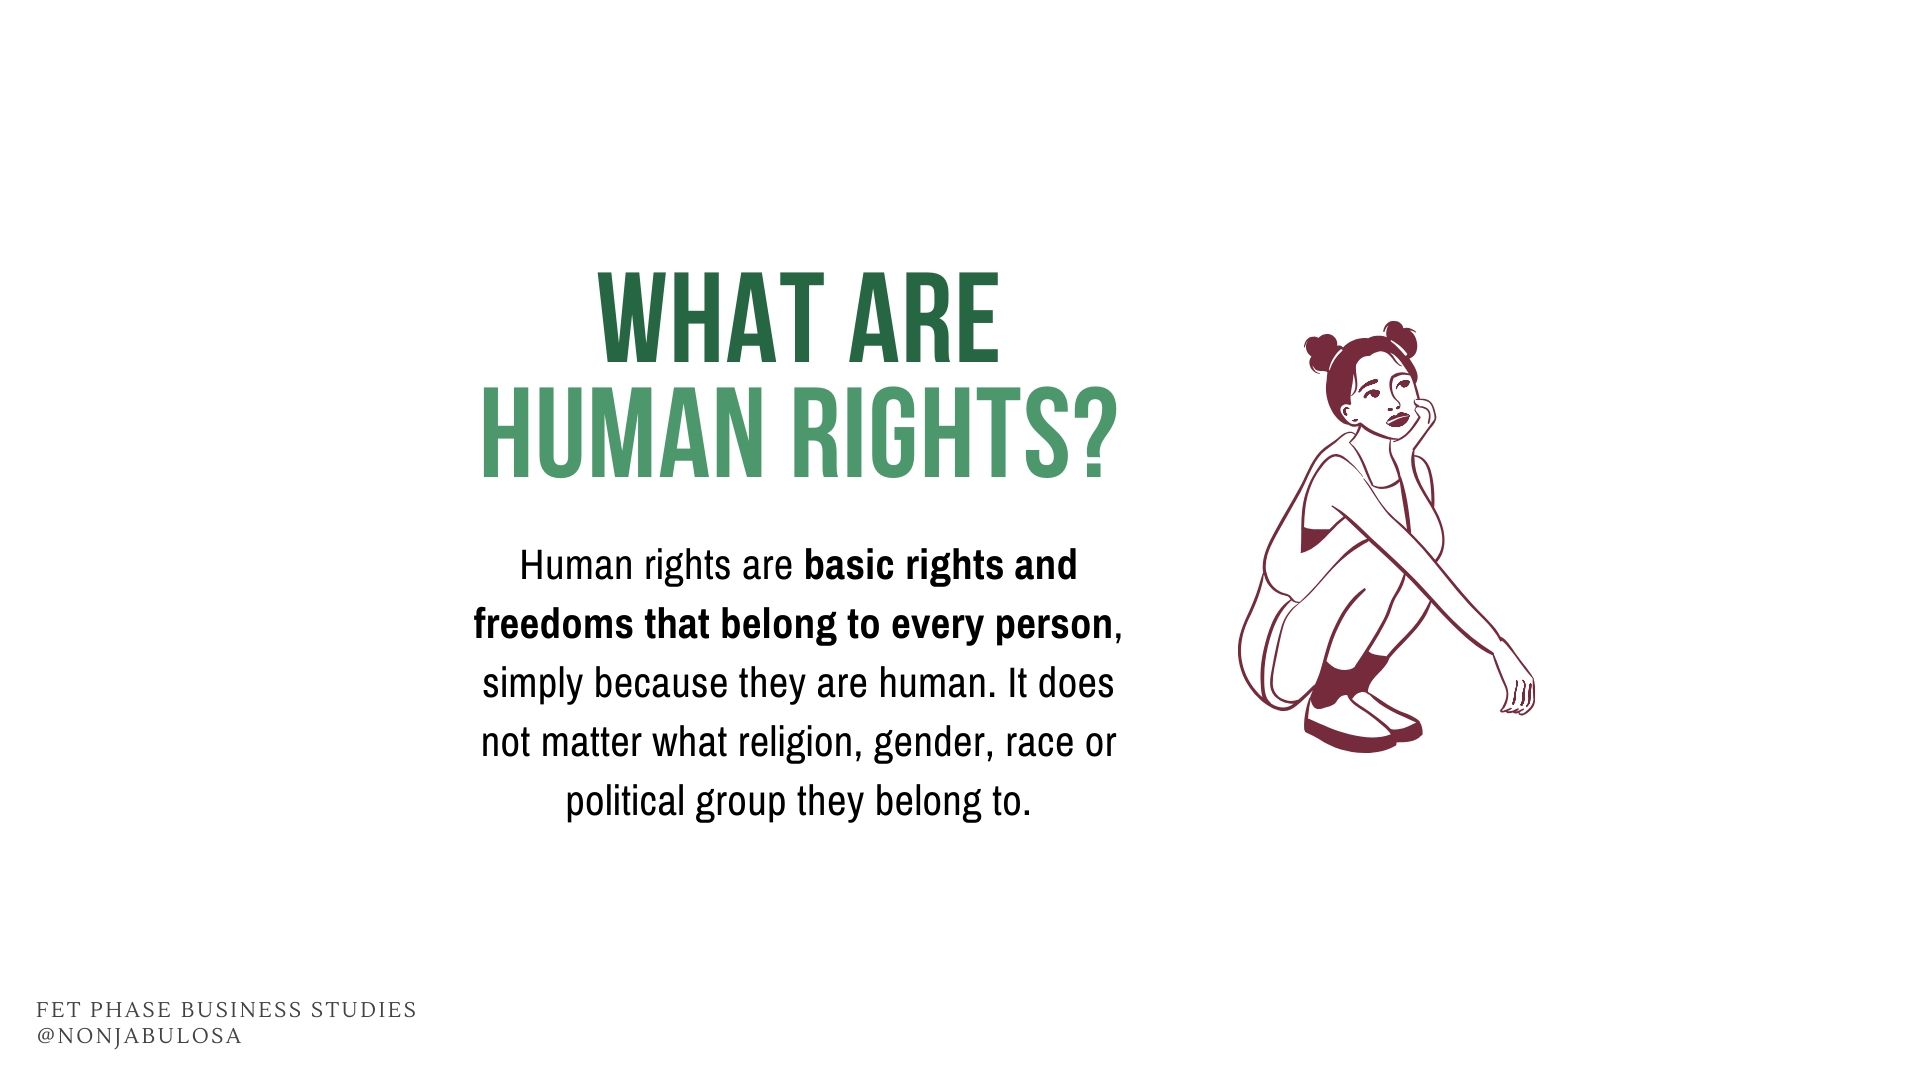 Image with definition of Human Rights on white background with simple text and illustration of a girl thinking, useful for human rights essay